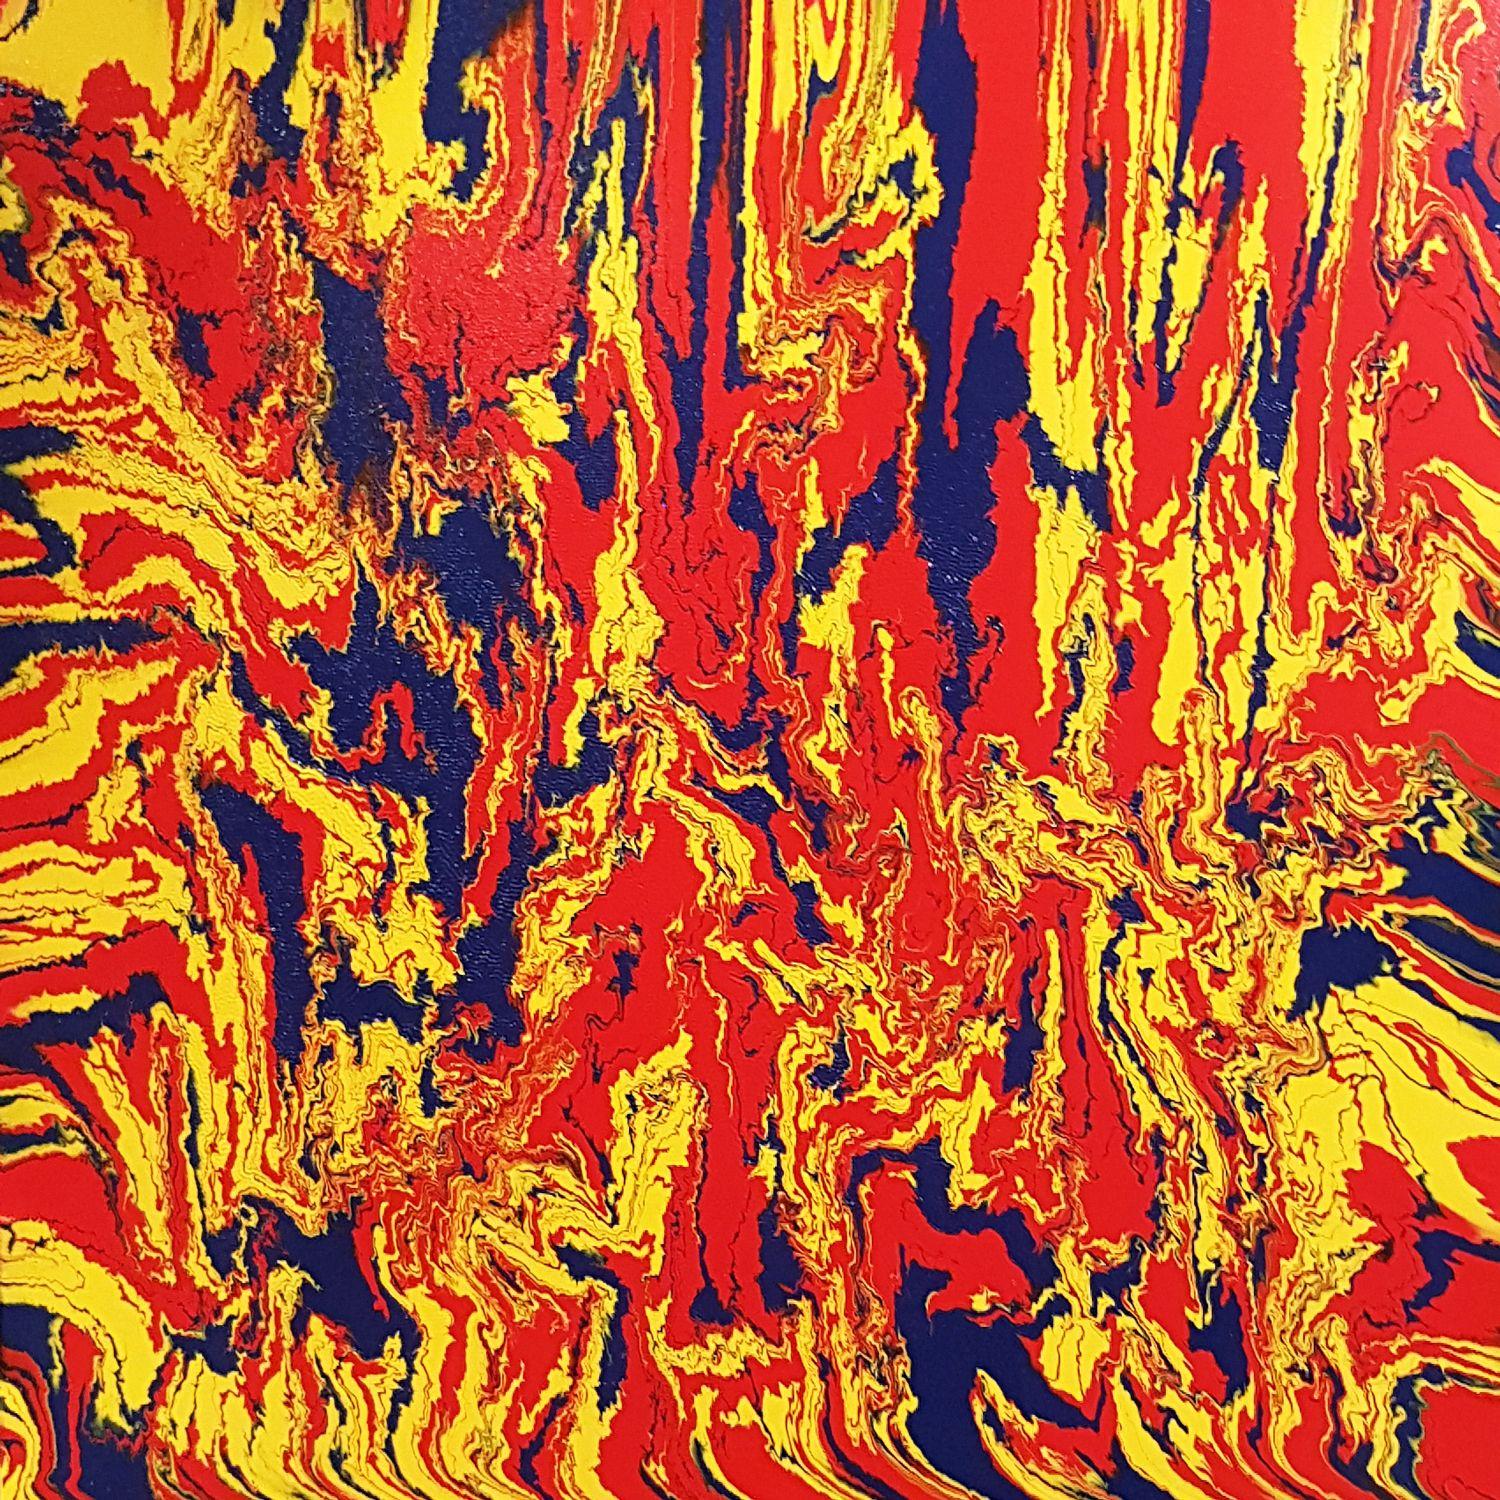 Bold abstract expressionism painting with vibrant primary colours; red, yellow, and blue. This original painting is a part of the "Primary Collection" which features one-of-a-kind statement pieces with a high gloss finish, spontaneous movement, and